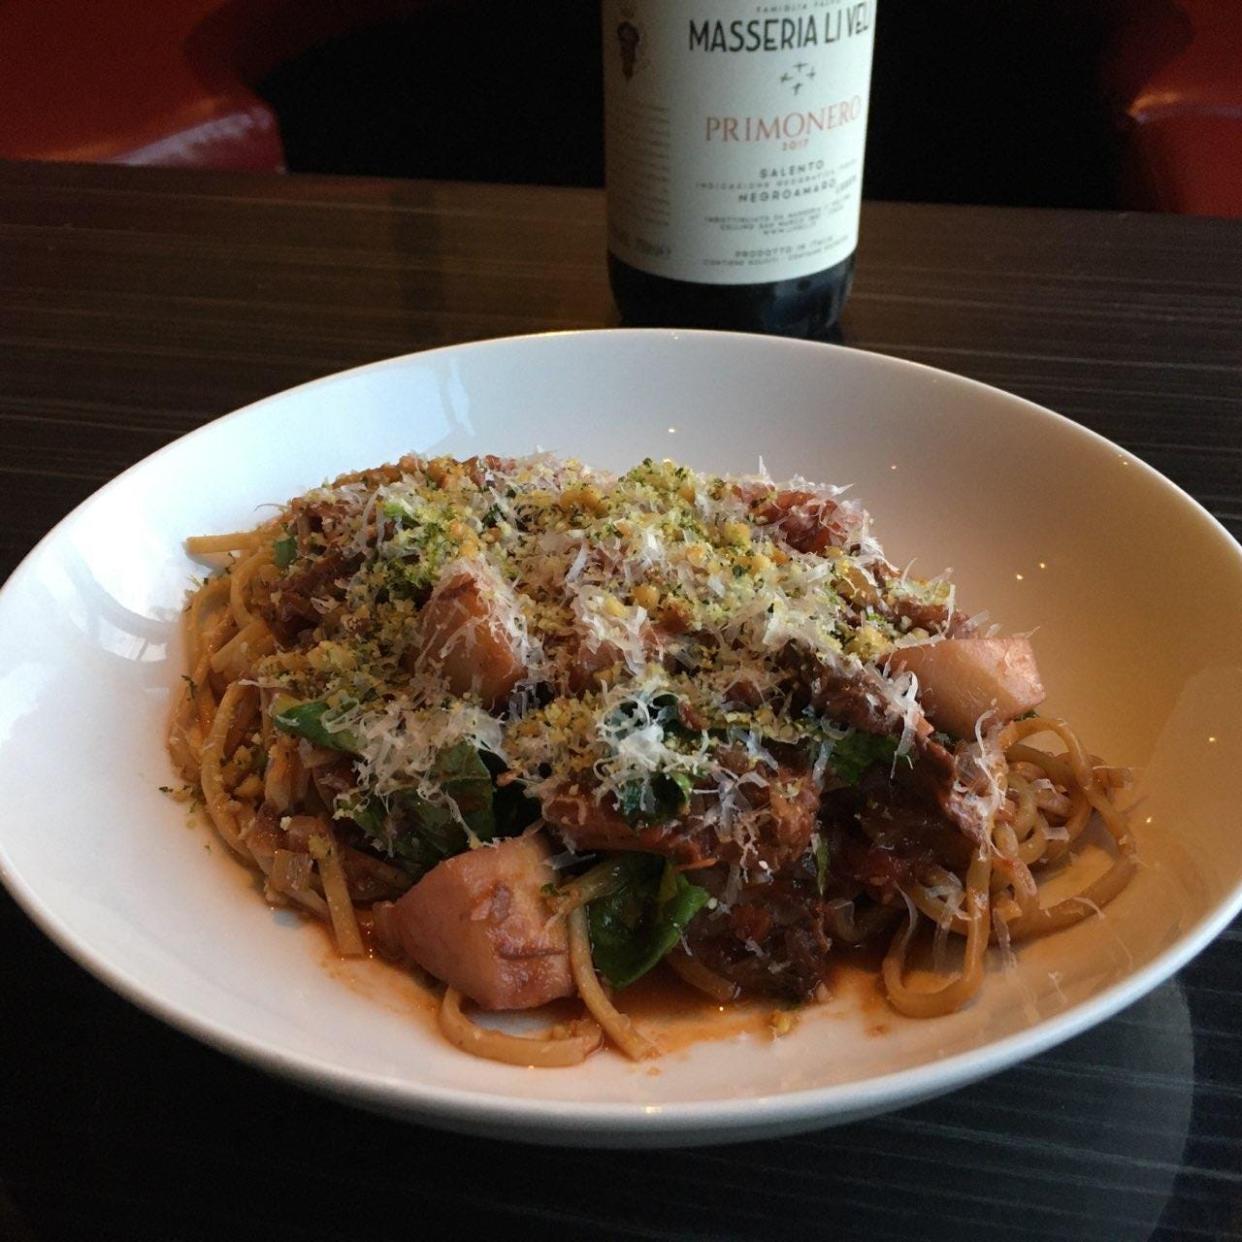 Ardovino's featured dish for January is Spaghetti a la Guitarra, house-made fresh pasta with braised pork shanks, parsnips and pine-nut gremolata. Make your reservations!